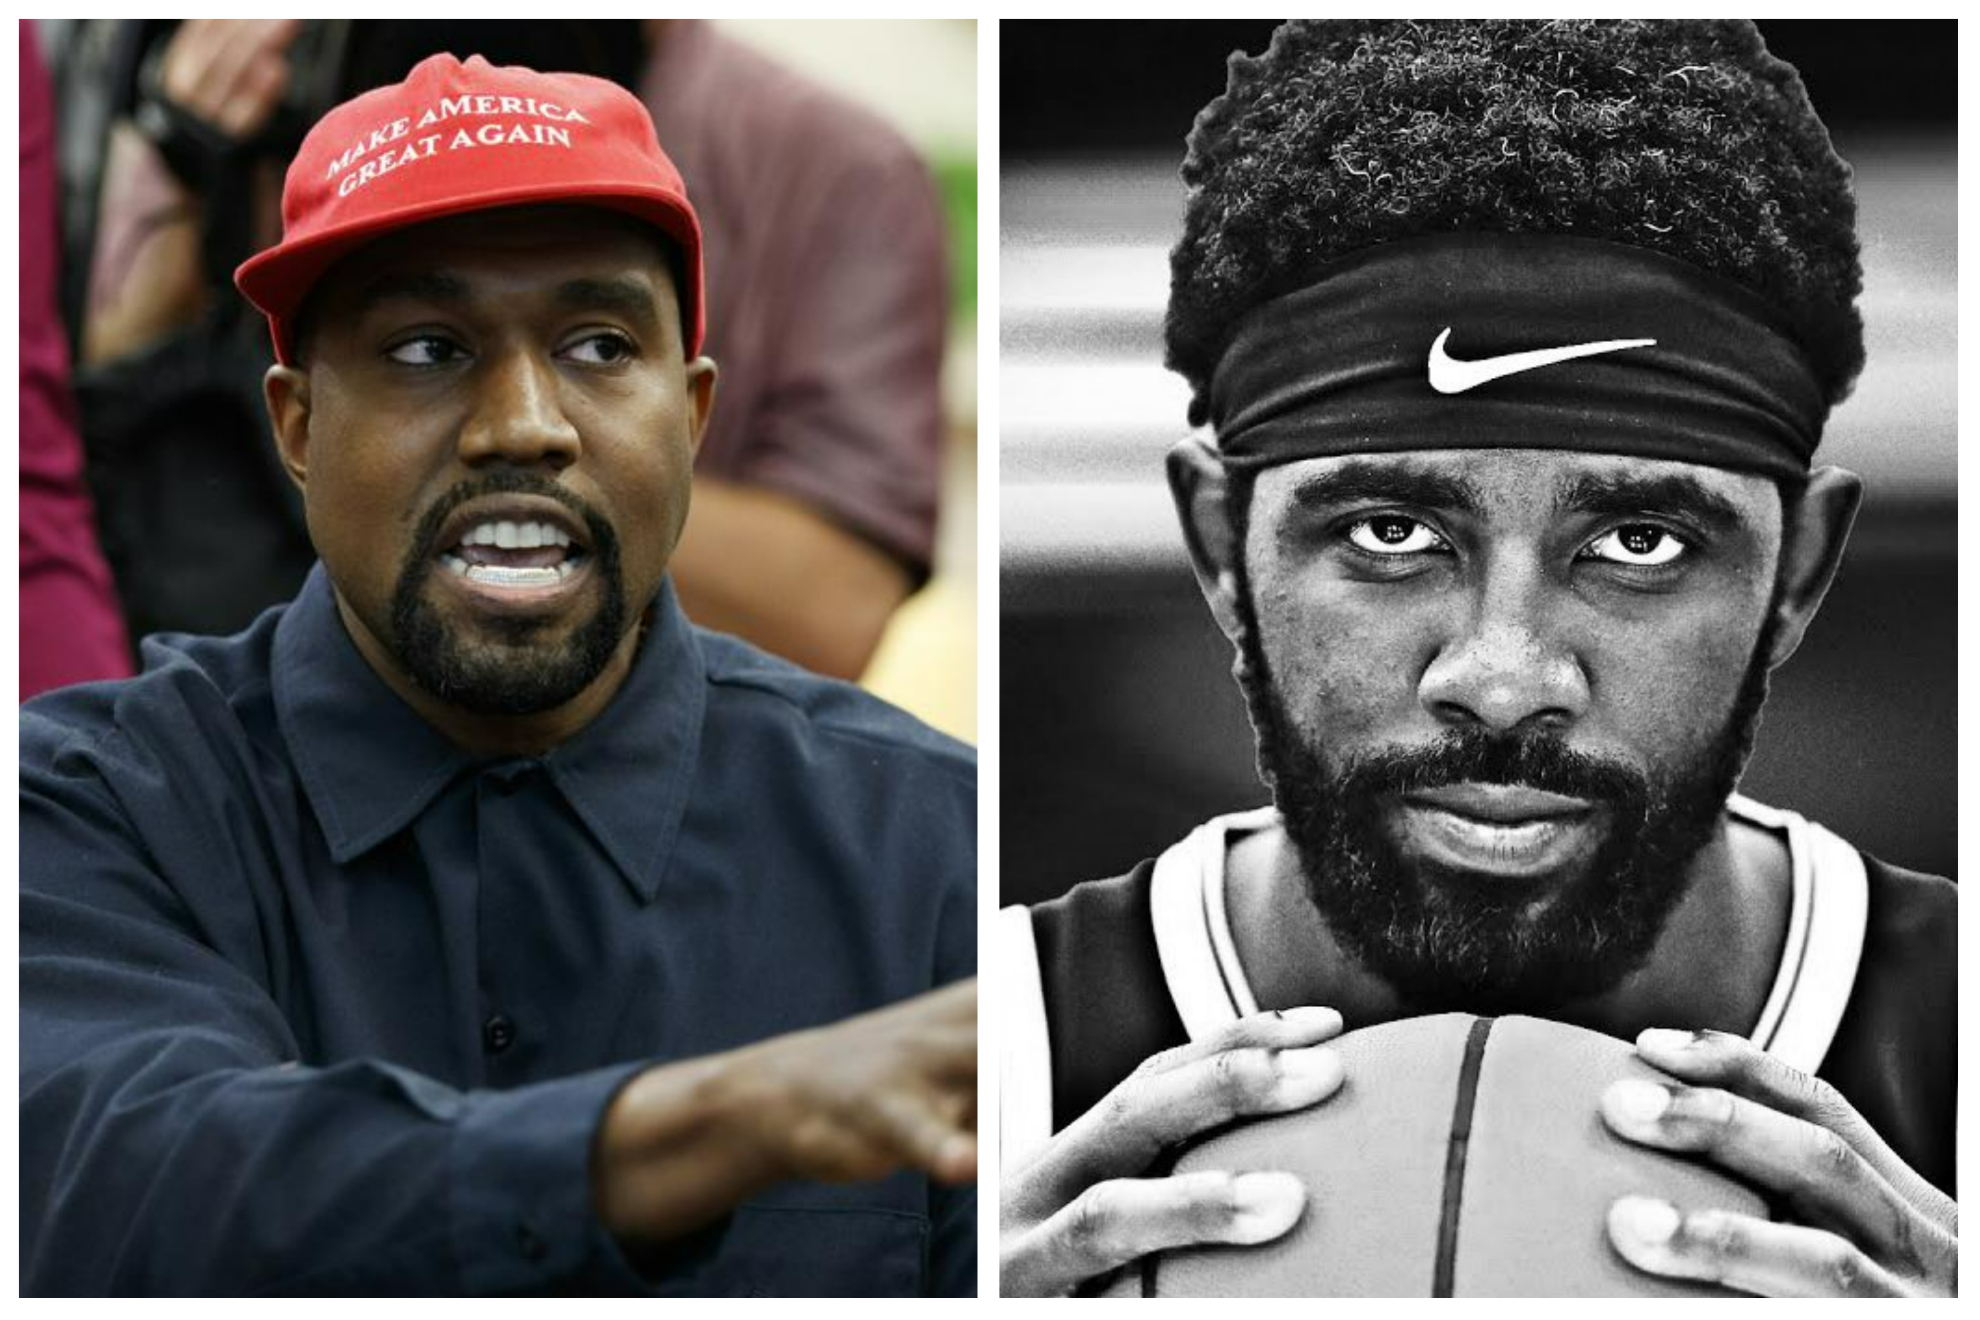 Kanye West posted a picture of Kyrie Irving with no caption on his Twitter feed.